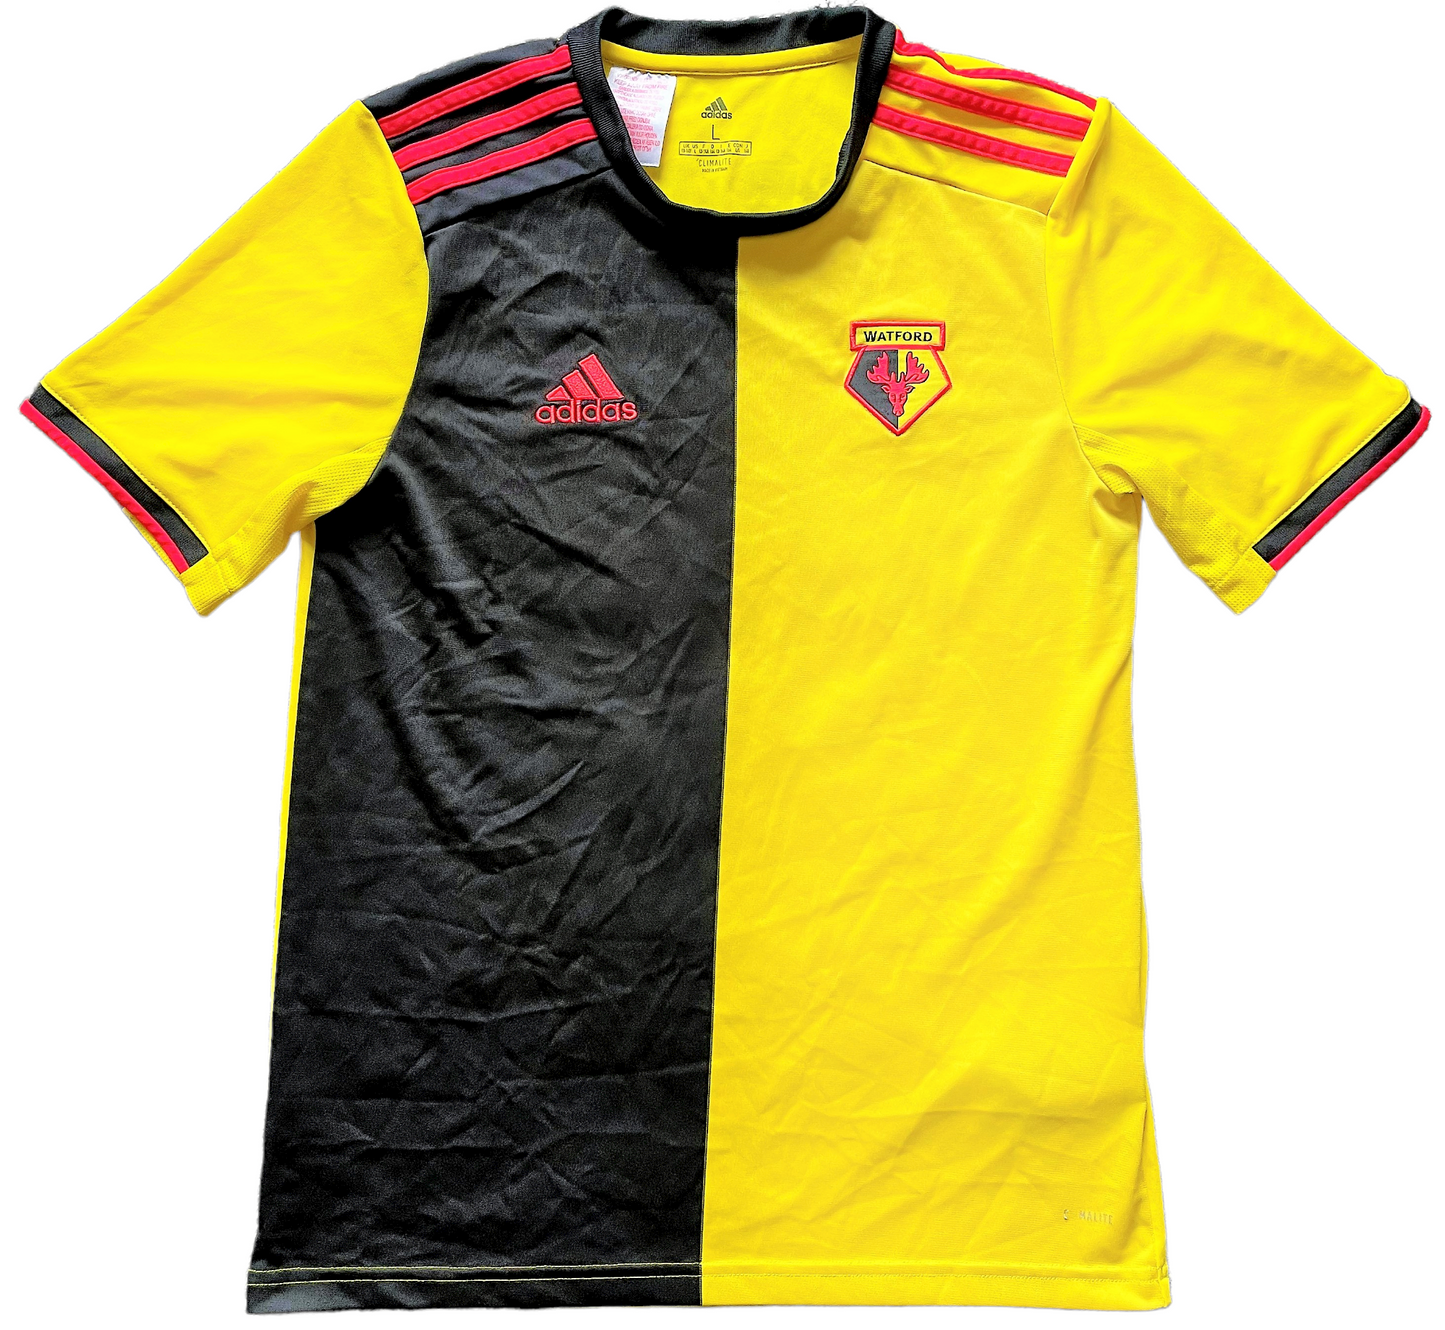 Watford Home Shirt 2019/20 (excellent) AdultsXS/Youths 13 to 14 years. Height 22 inches